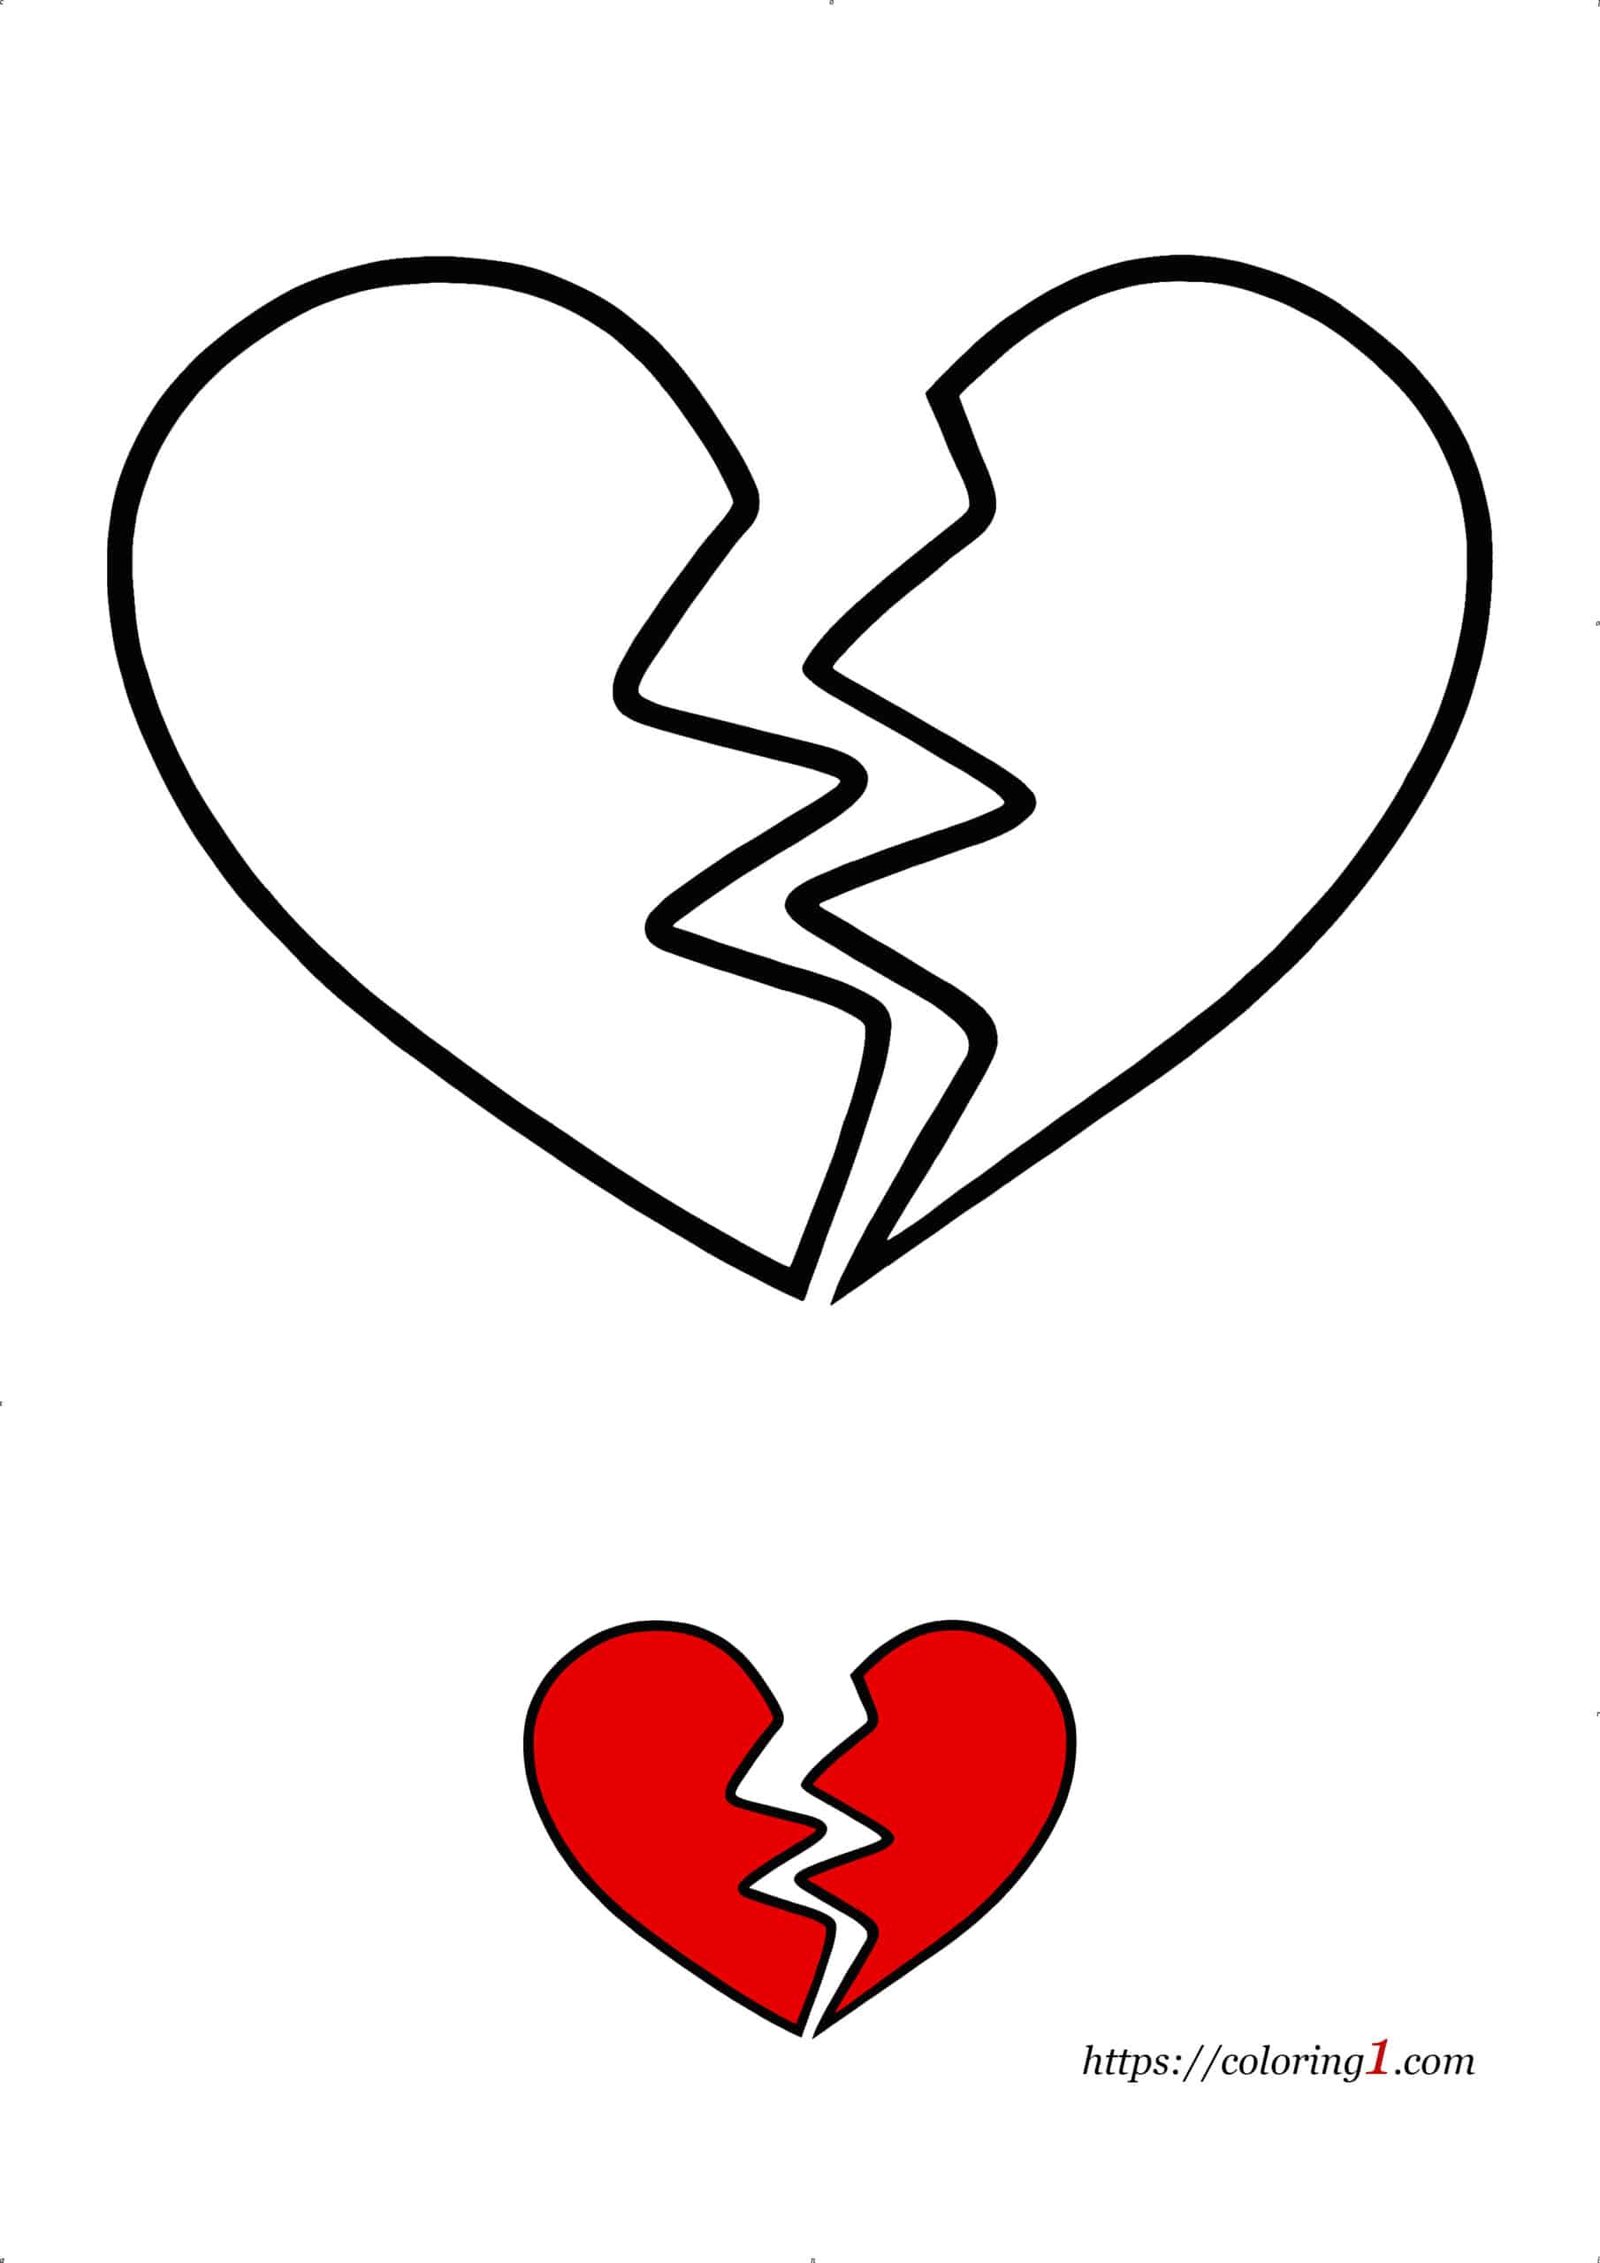 Broken Heart coloring page to print easy